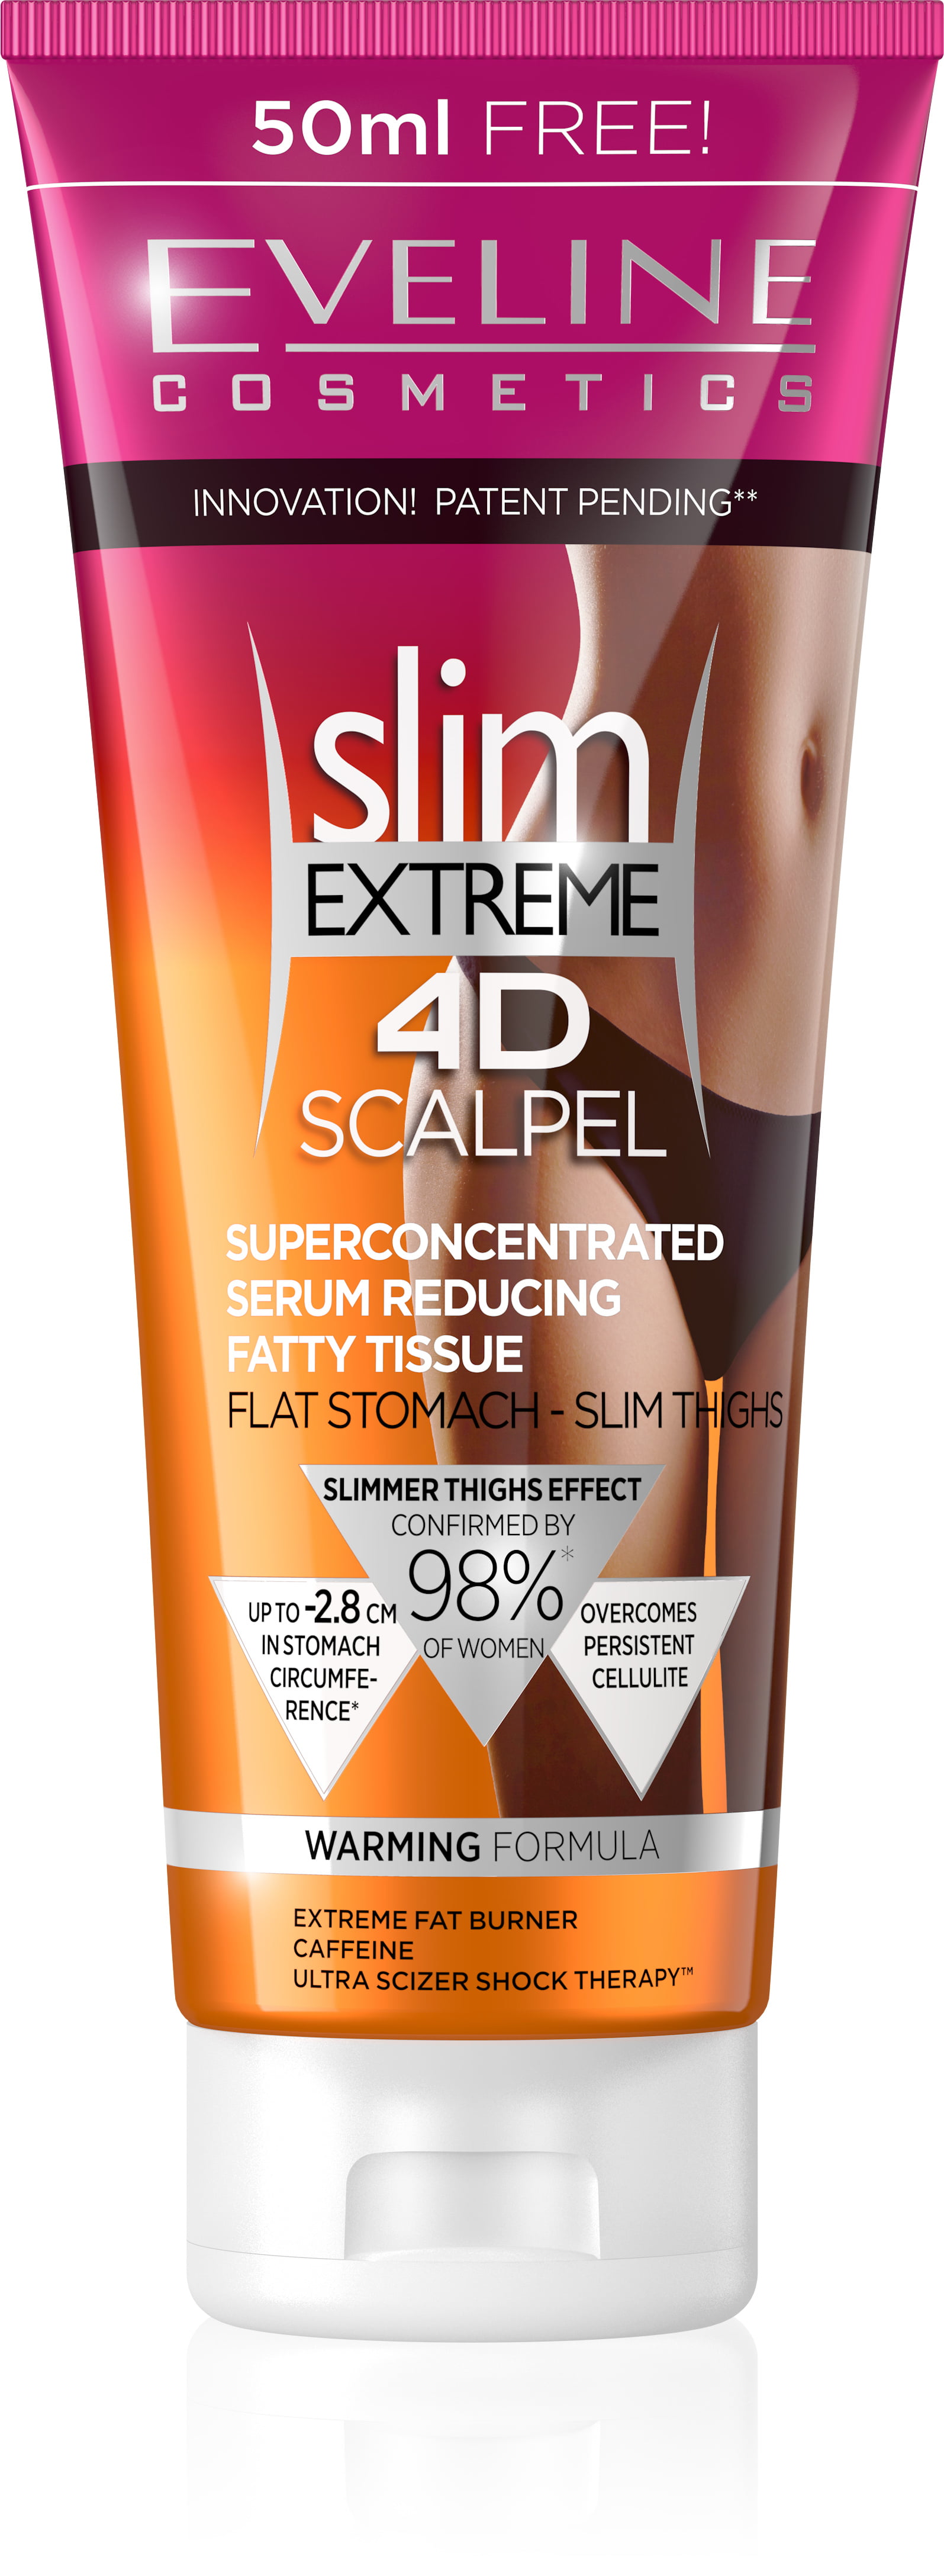 Eveline Cosmetics Slim Extreme 4d Scalpel Super Concentrated Serum Reducing Fatty Tissue